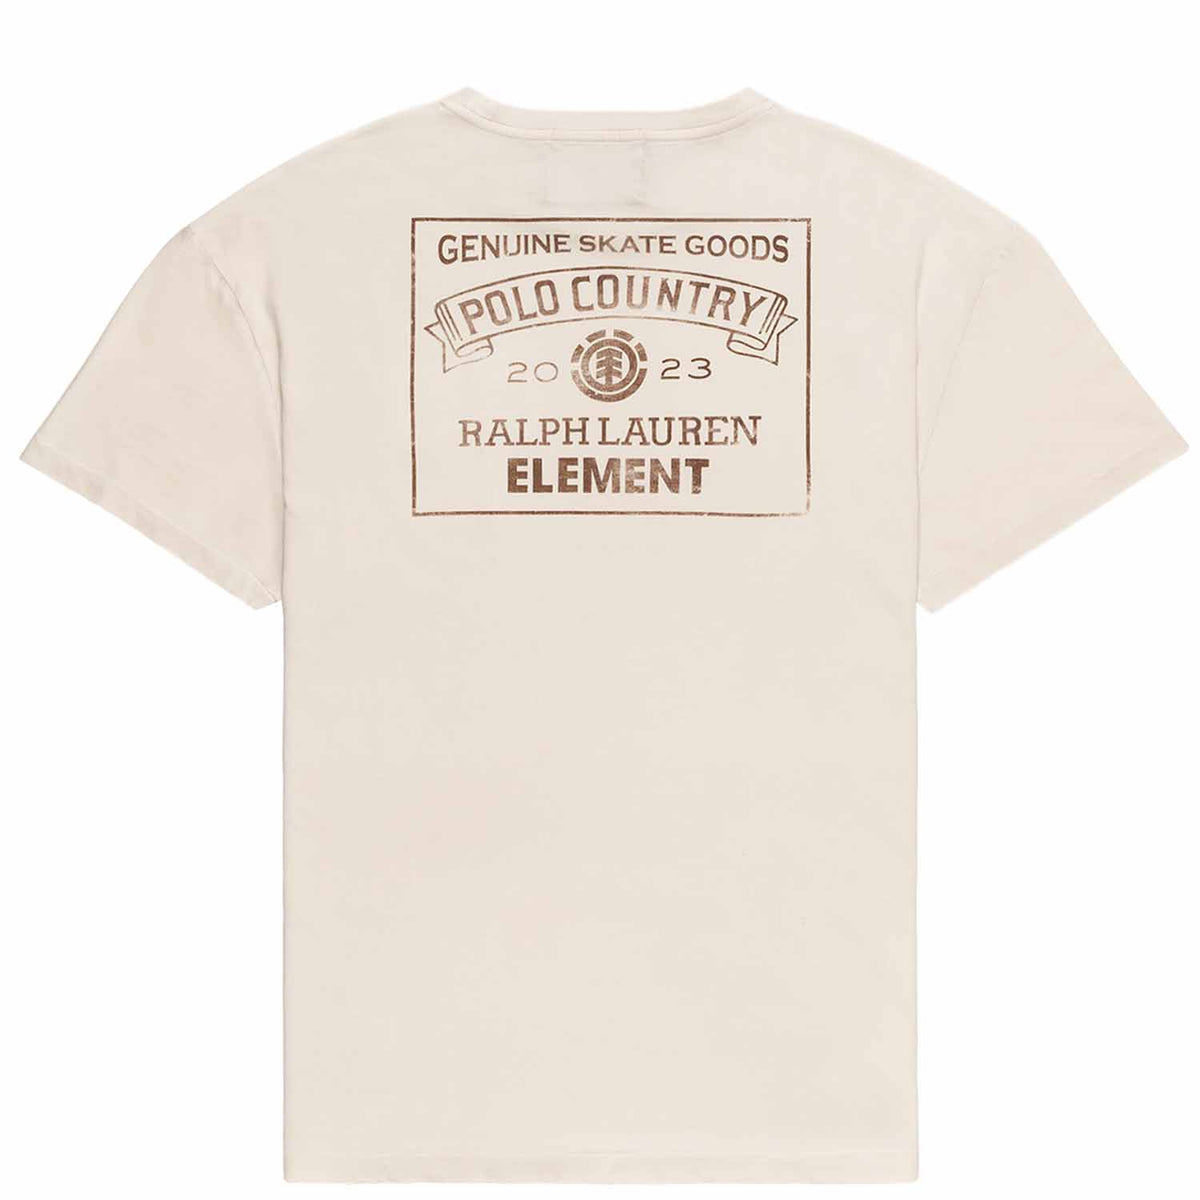 Polo Ralph Lauren x Element Pocket Tee in cream. Back photo of Polo Ralph Lauren x Element logo printed on back of shirt in distressed brown color. Reads &quot;Genuine Skate Goods, Polo Country, 2023, *Element Logo*, Ralph Lauren, Element.&quot;